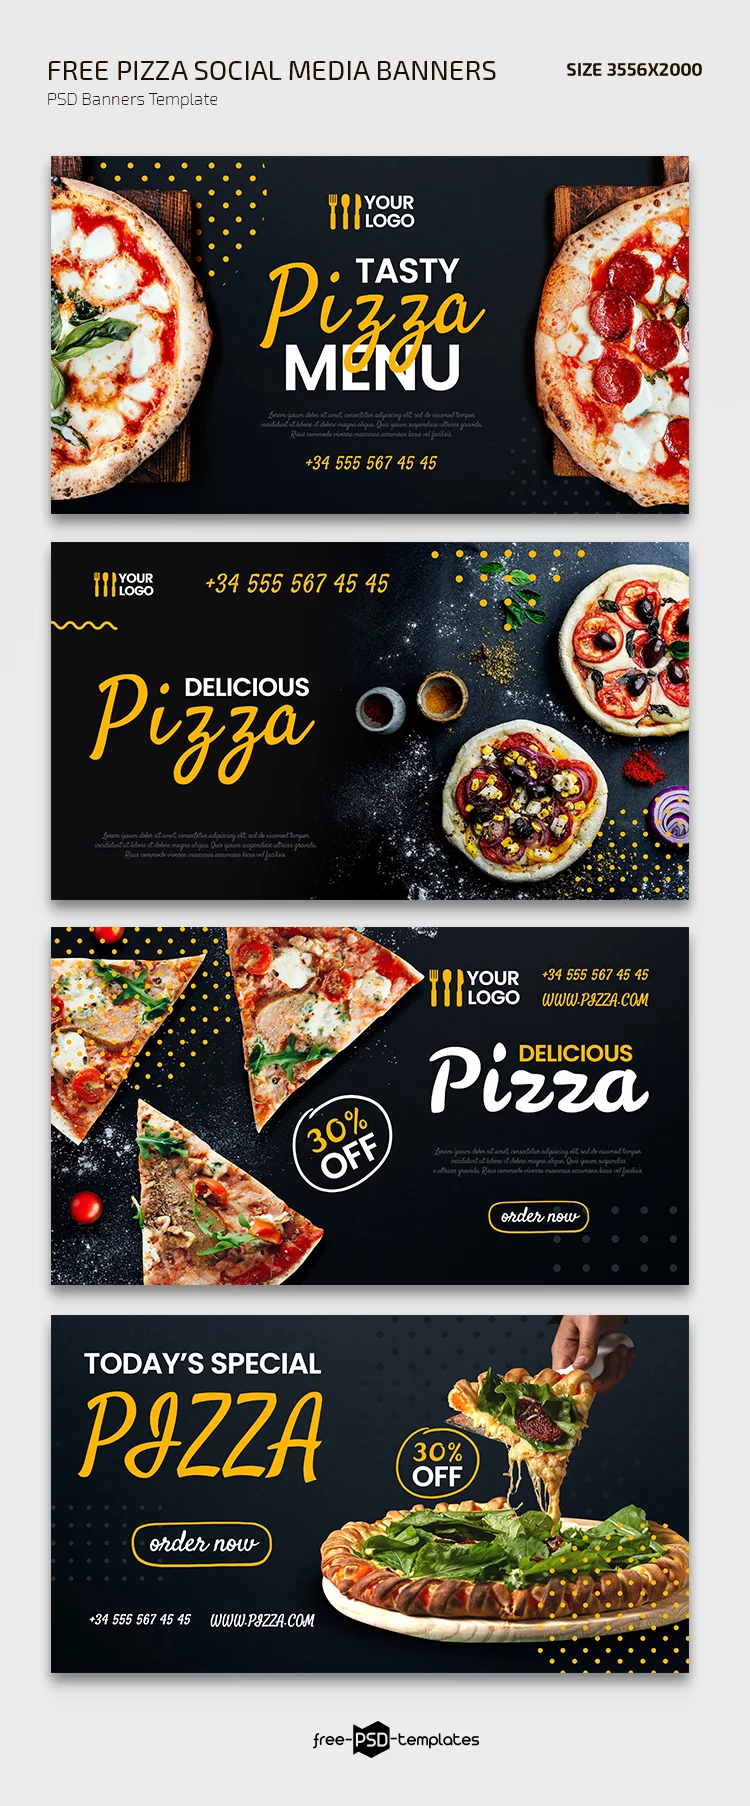 Free Pizza Social Media Banners Templates in PSD + Vector (.ai+.eps)